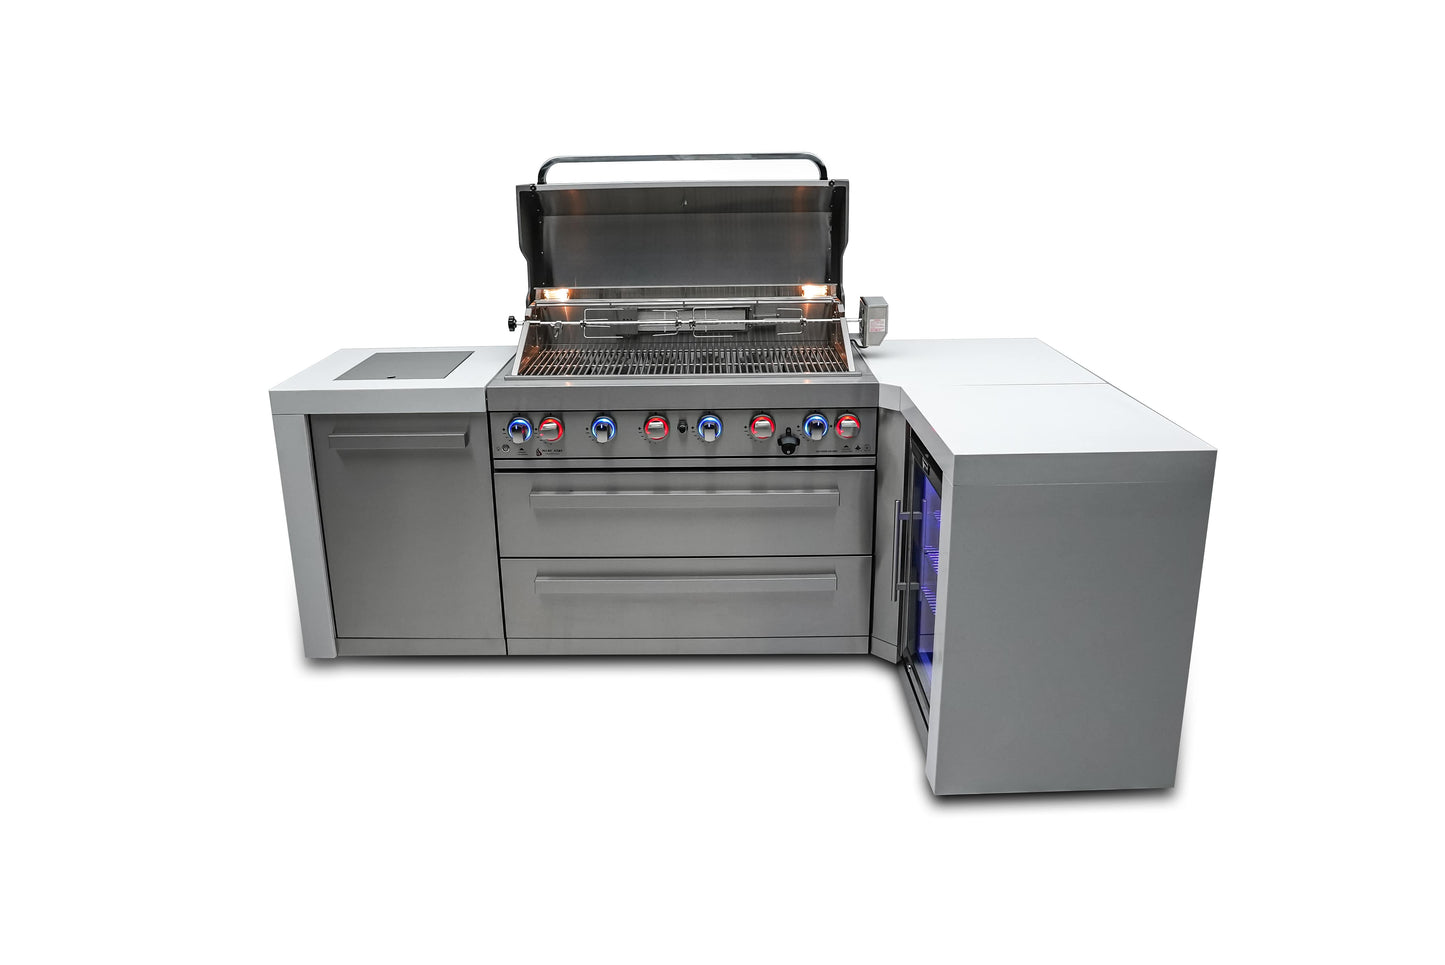 Mont Alpi 805 Deluxe Stainless Steel Island Grill with Fridge Cabinet, 90 Degree Corner, 6-Burner, Infrared Burners - MAi805-D90FC